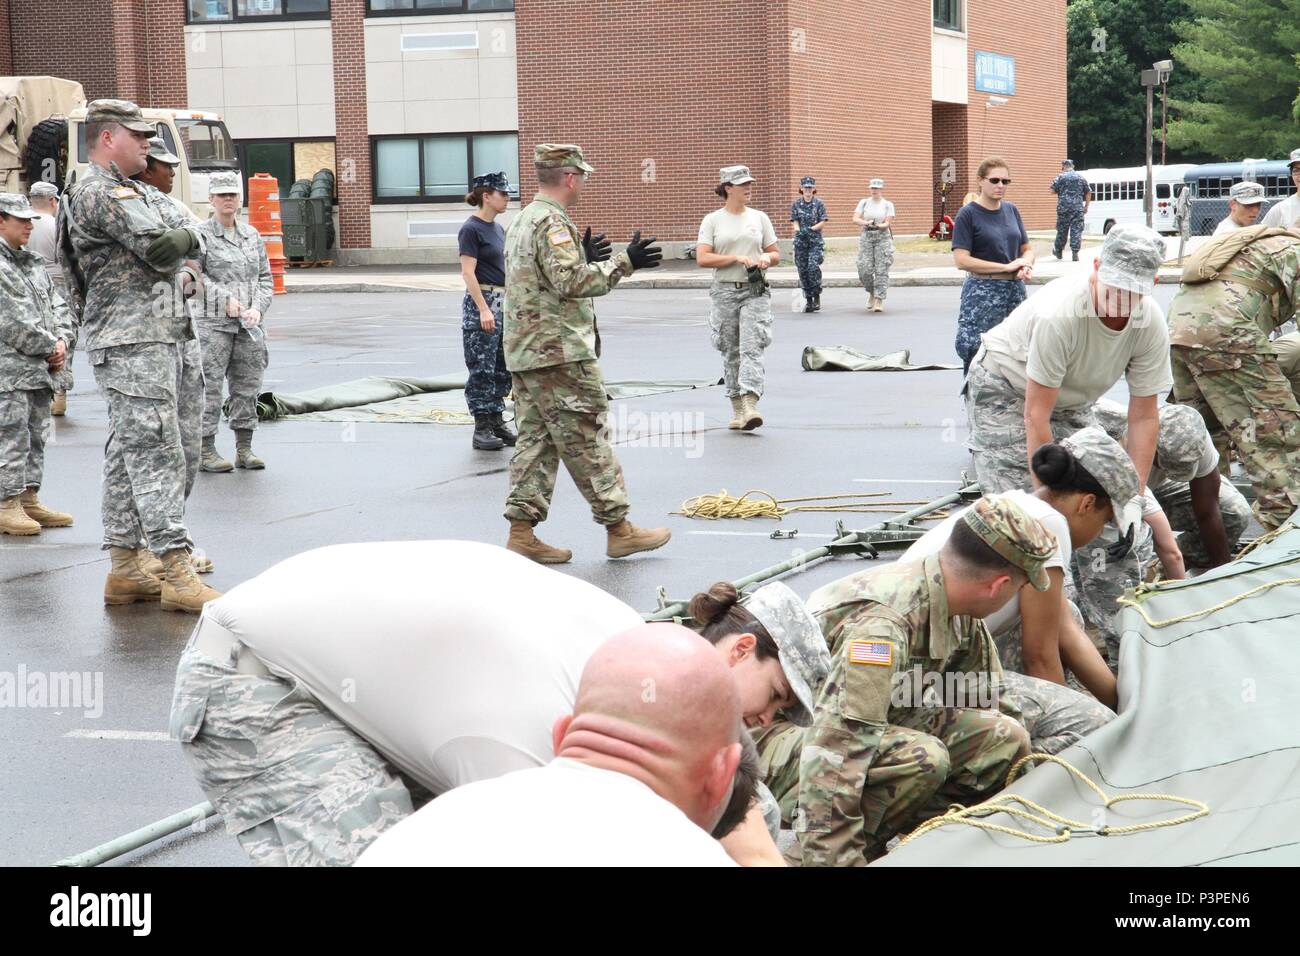 Capt. Burke Tervort, with the 48th Combat Support Hospital out of Fort Meade, Md., gives commands to service members in order to set up the veterinary hospital tents in preparation for the Healthy Cortland Innovative Readiness Training event, July 14th, 2016.  Healthy Cortland is one of the IRT events that provides real-world training in a joint civil-military environment while delivering world-class medical care to the people of Cortland County, N.Y., from July 15-24. Stock Photo